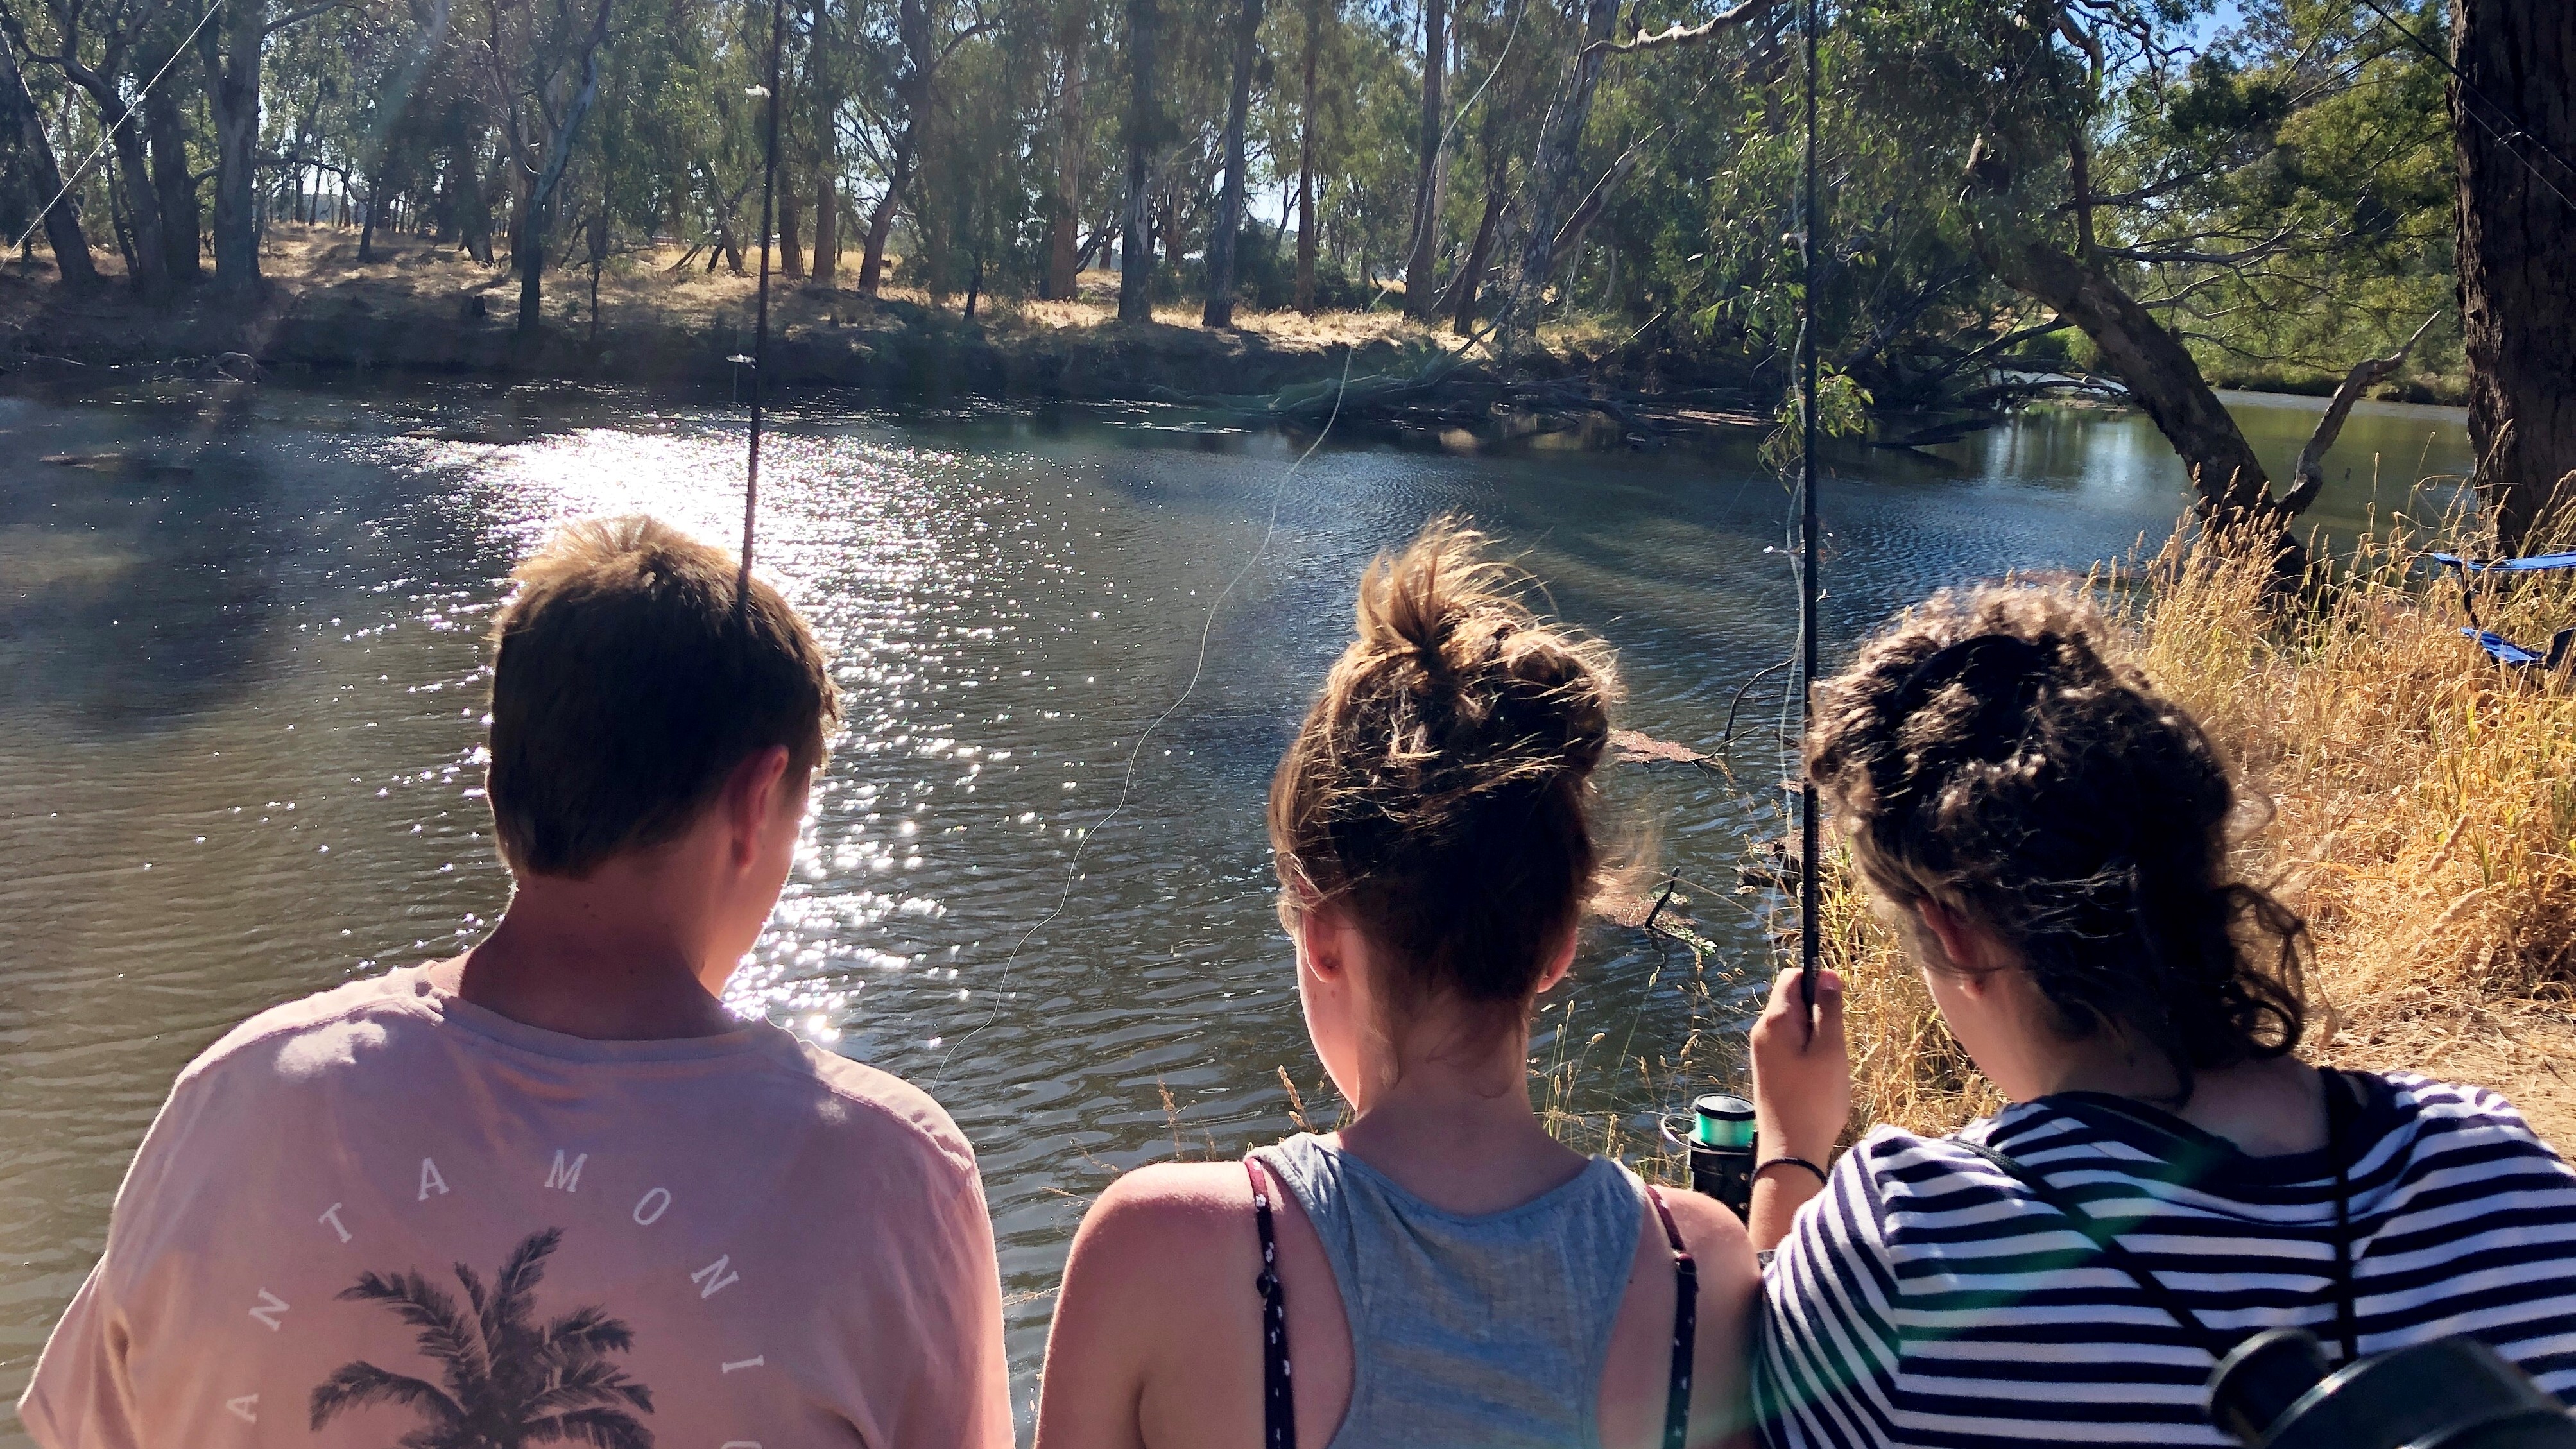 Students at the Dookie camp enjoy fishing at Caseys Weir